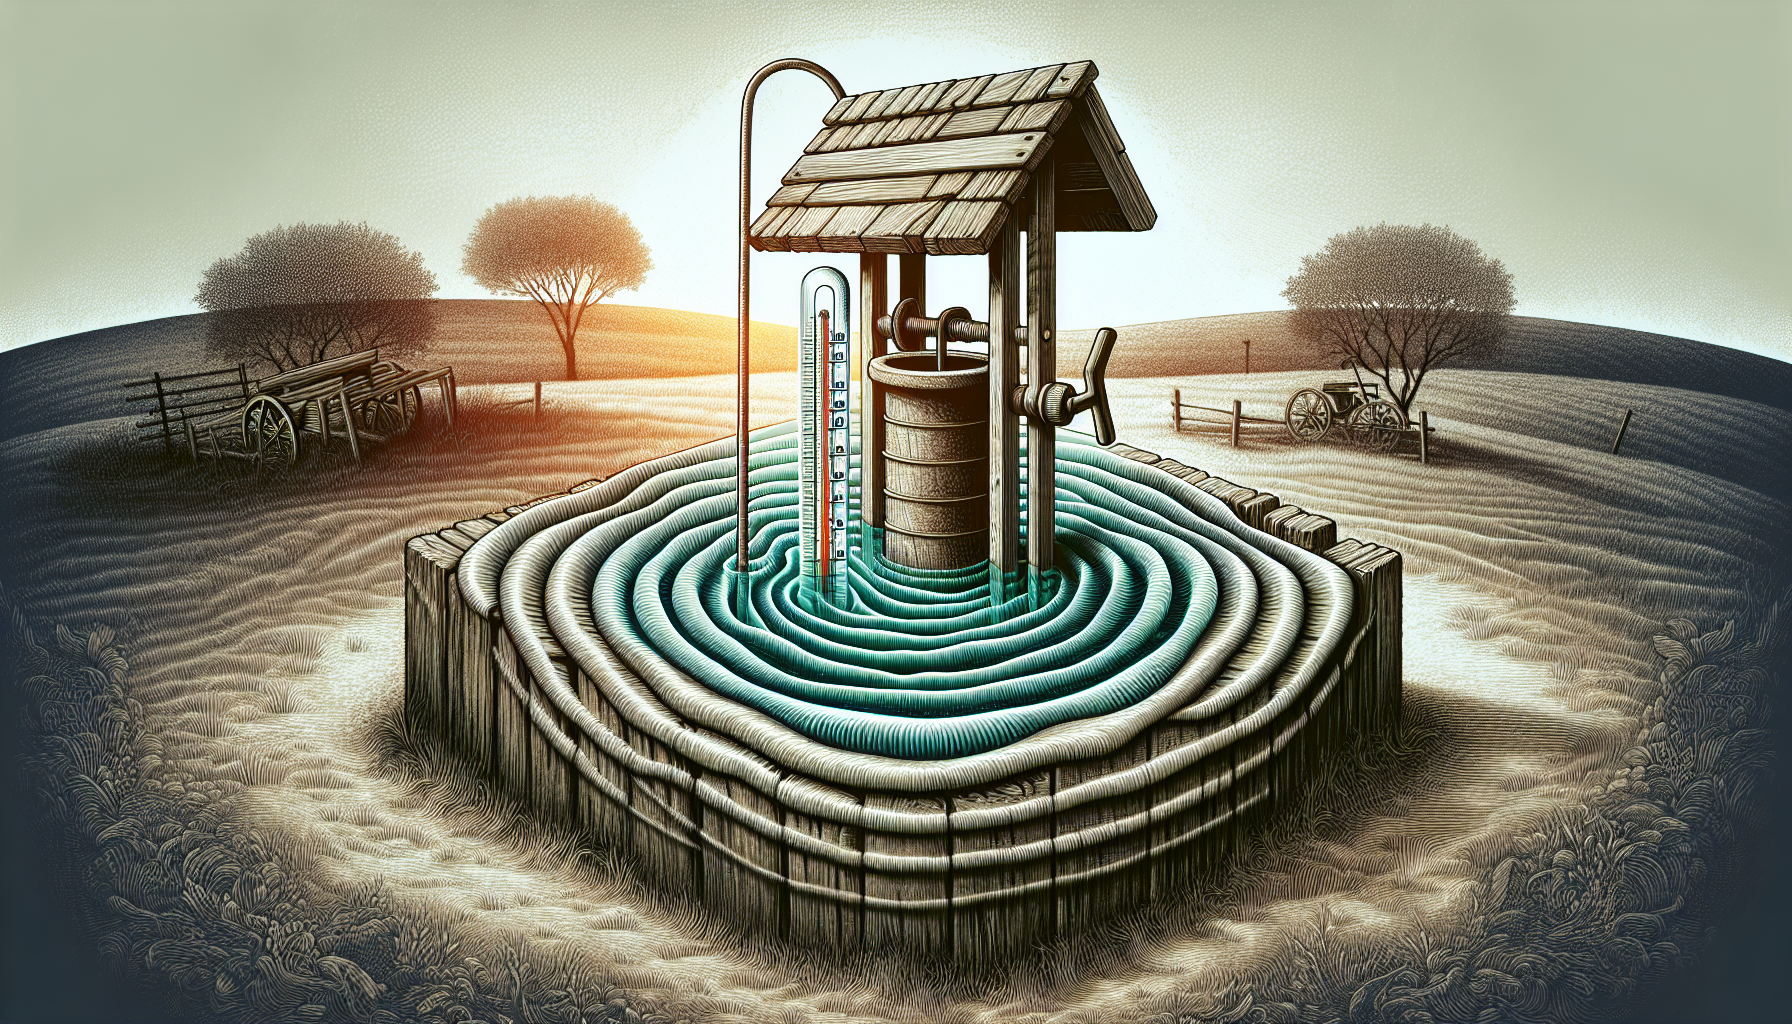 Are There Resources For Well Owners Dealing With Well Water Temperature Fluctuations?